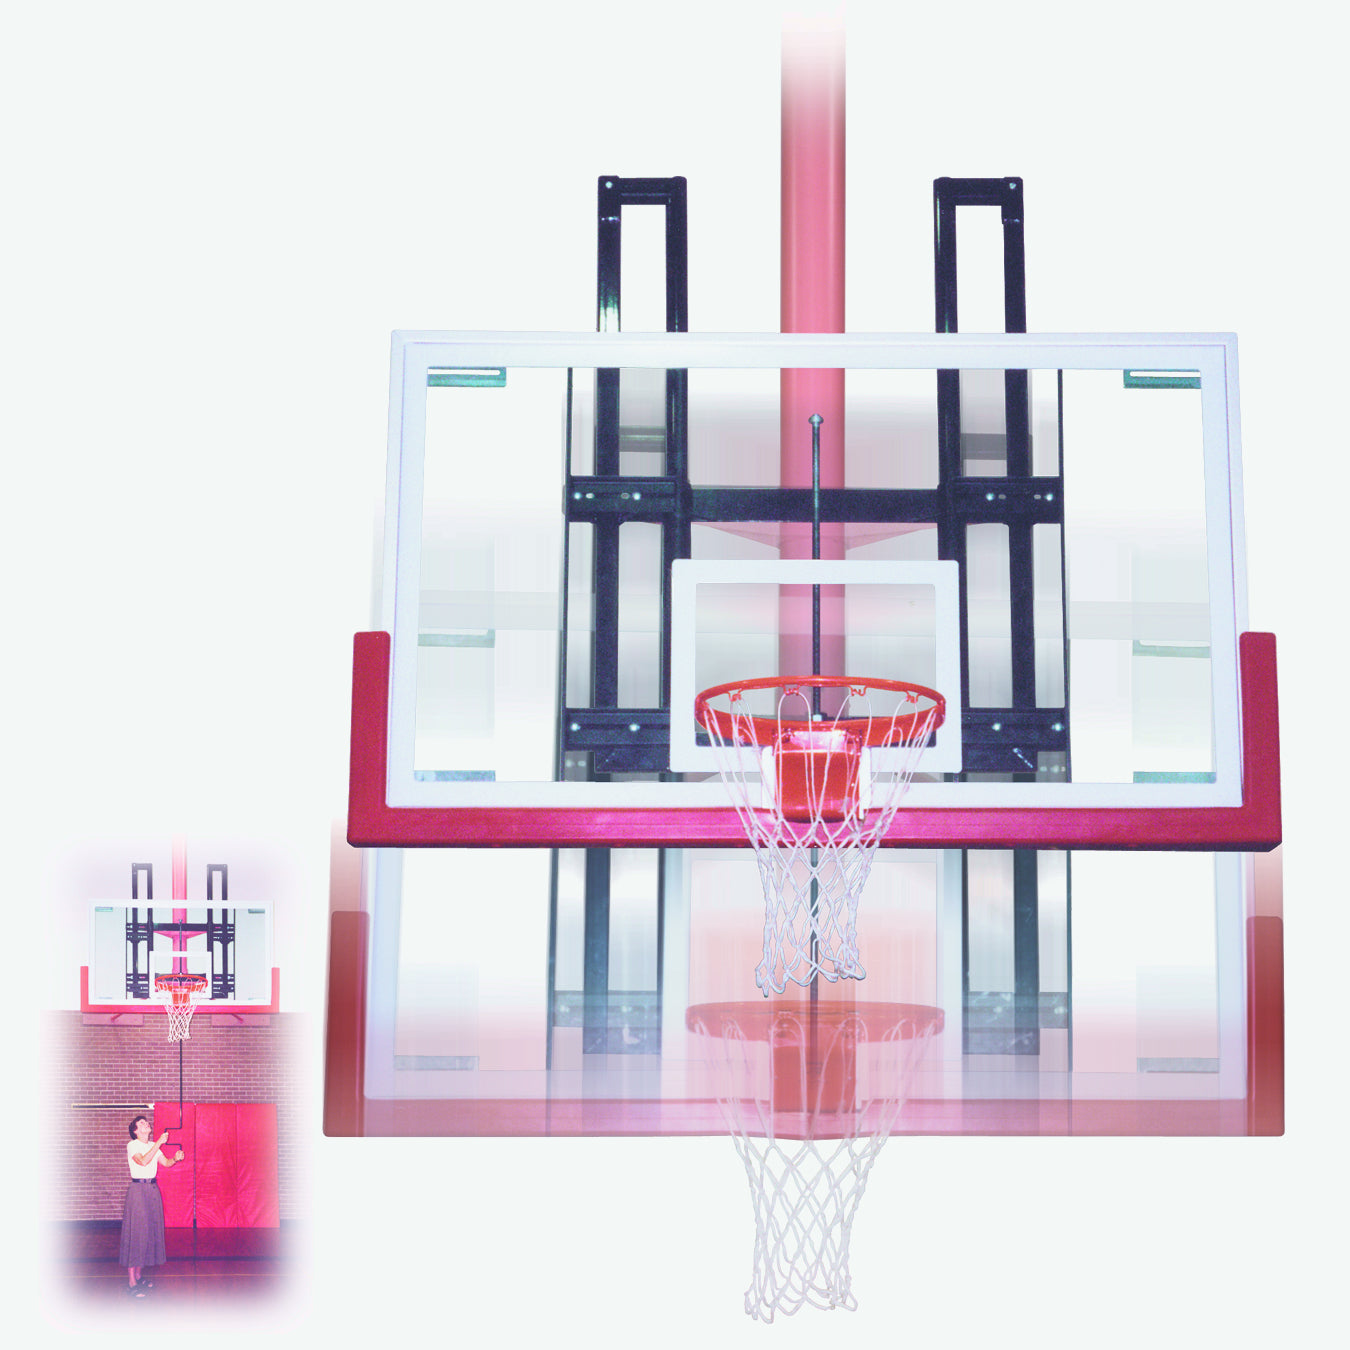 First Team SuperMount46 Pro Wall Mounted Basketball Goal - 36"x60" Tempered Glass